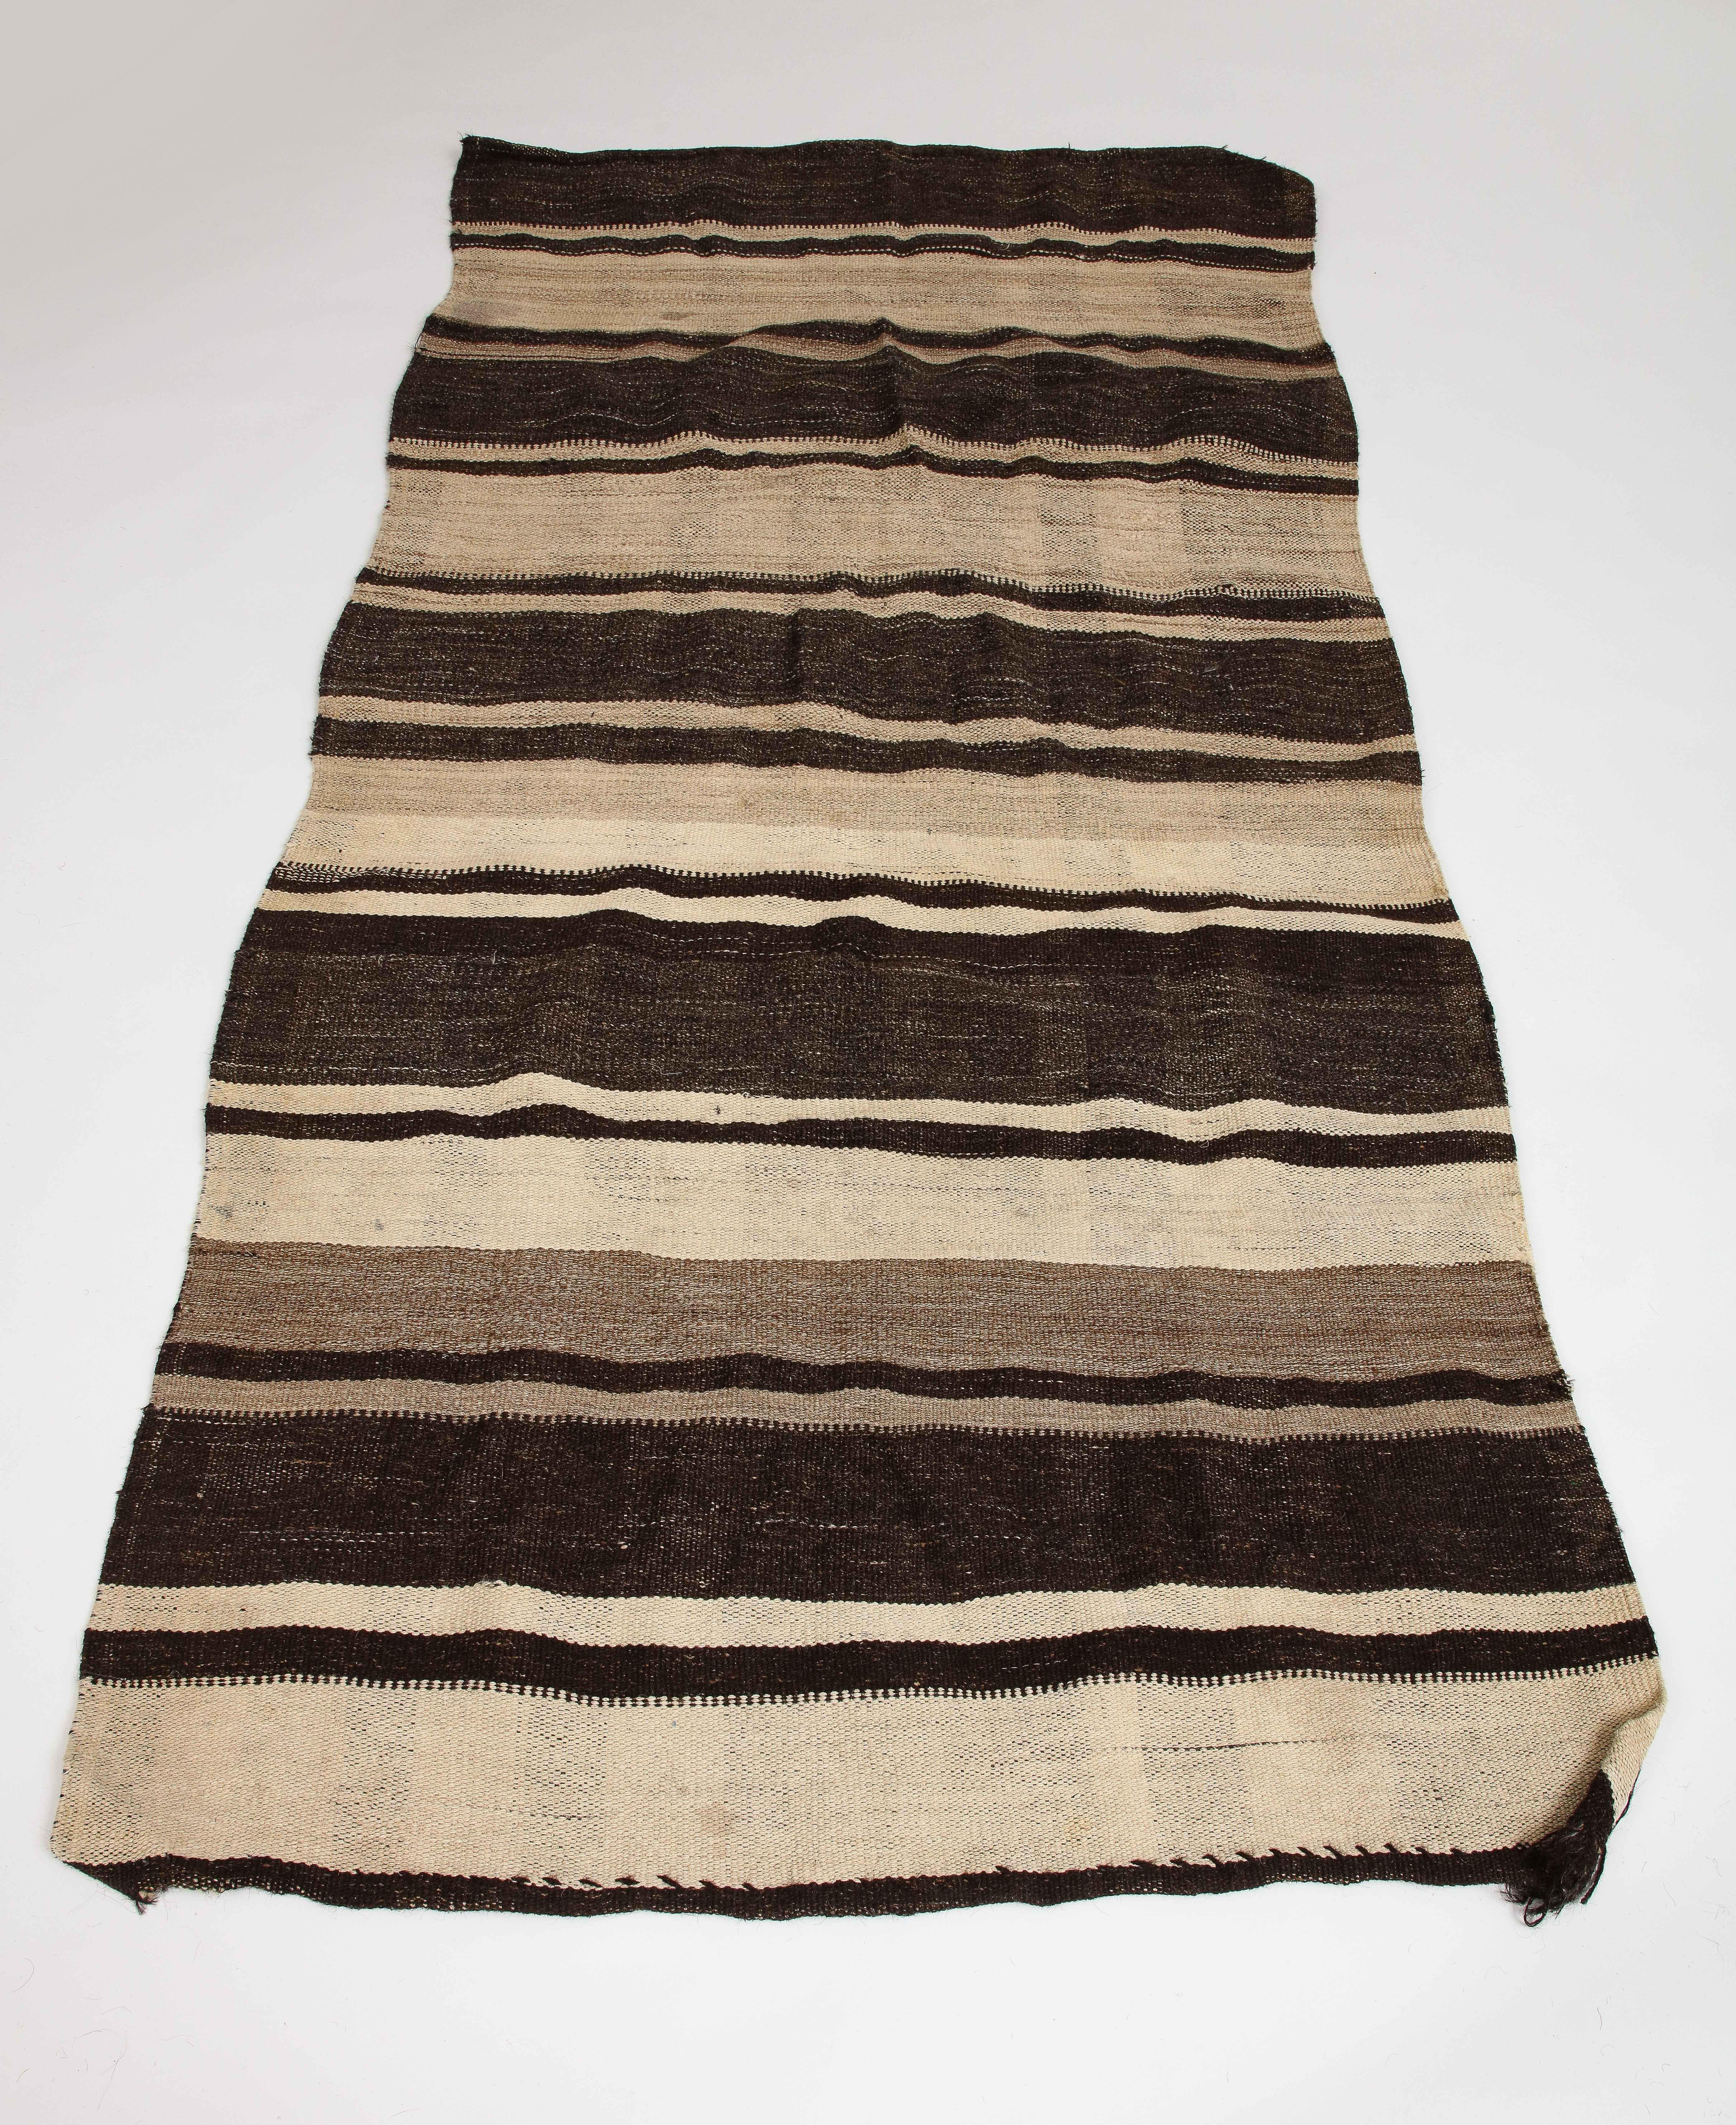 Vintage Turkish Kilim Brown Striped Wool Rug In Good Condition For Sale In Chicago, IL